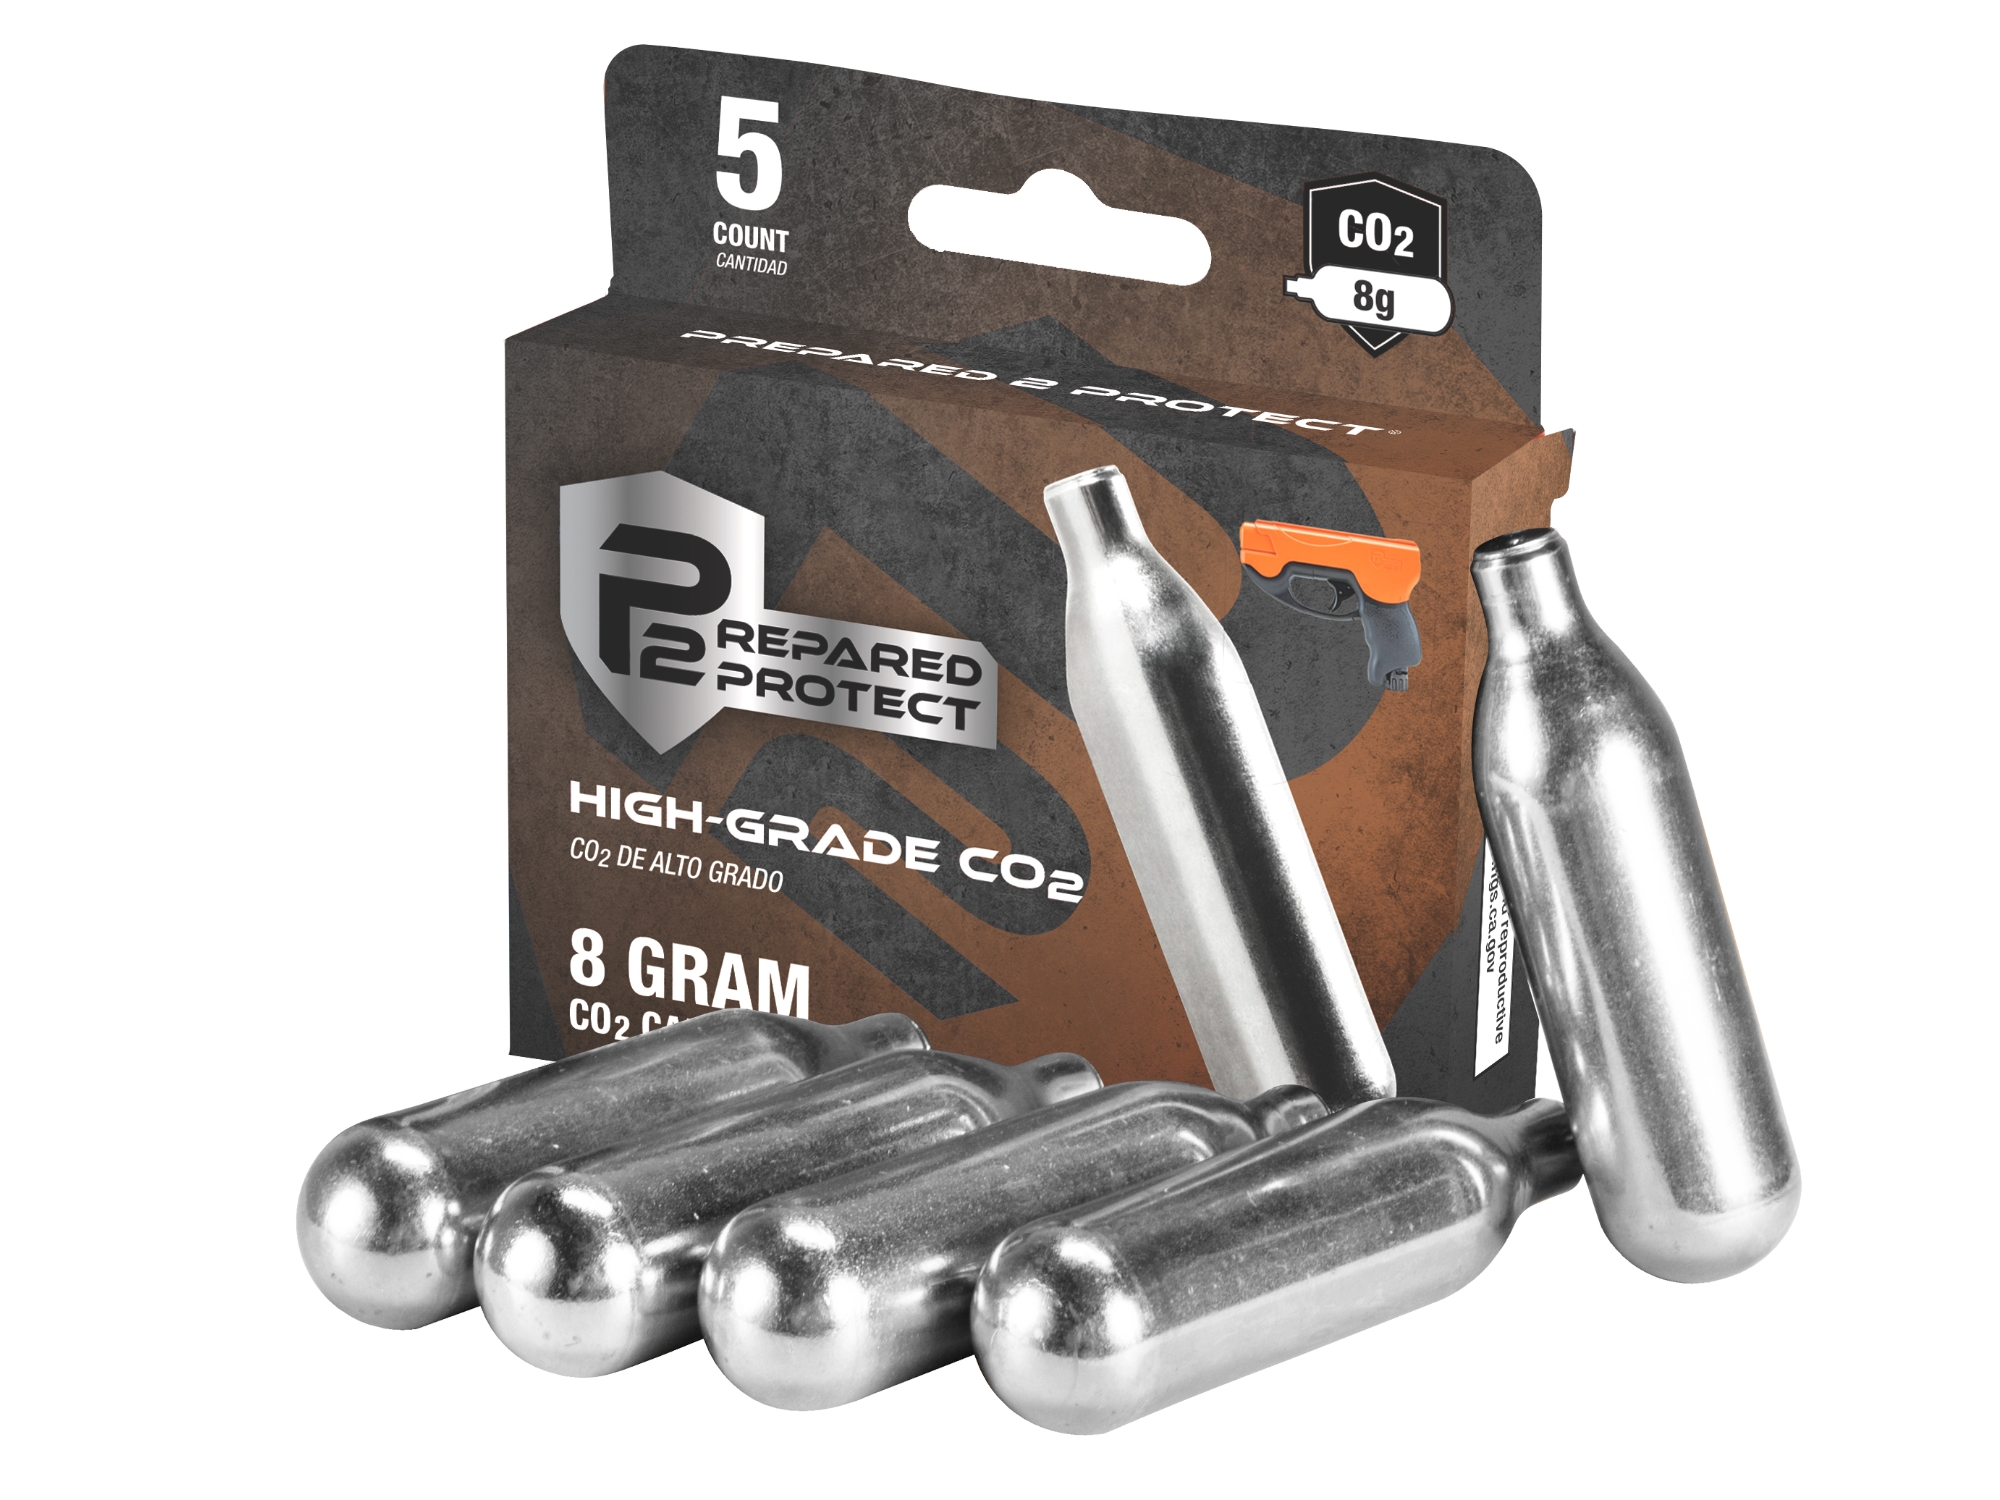 P2P 8 gram CO2 cylinders, 5 ct